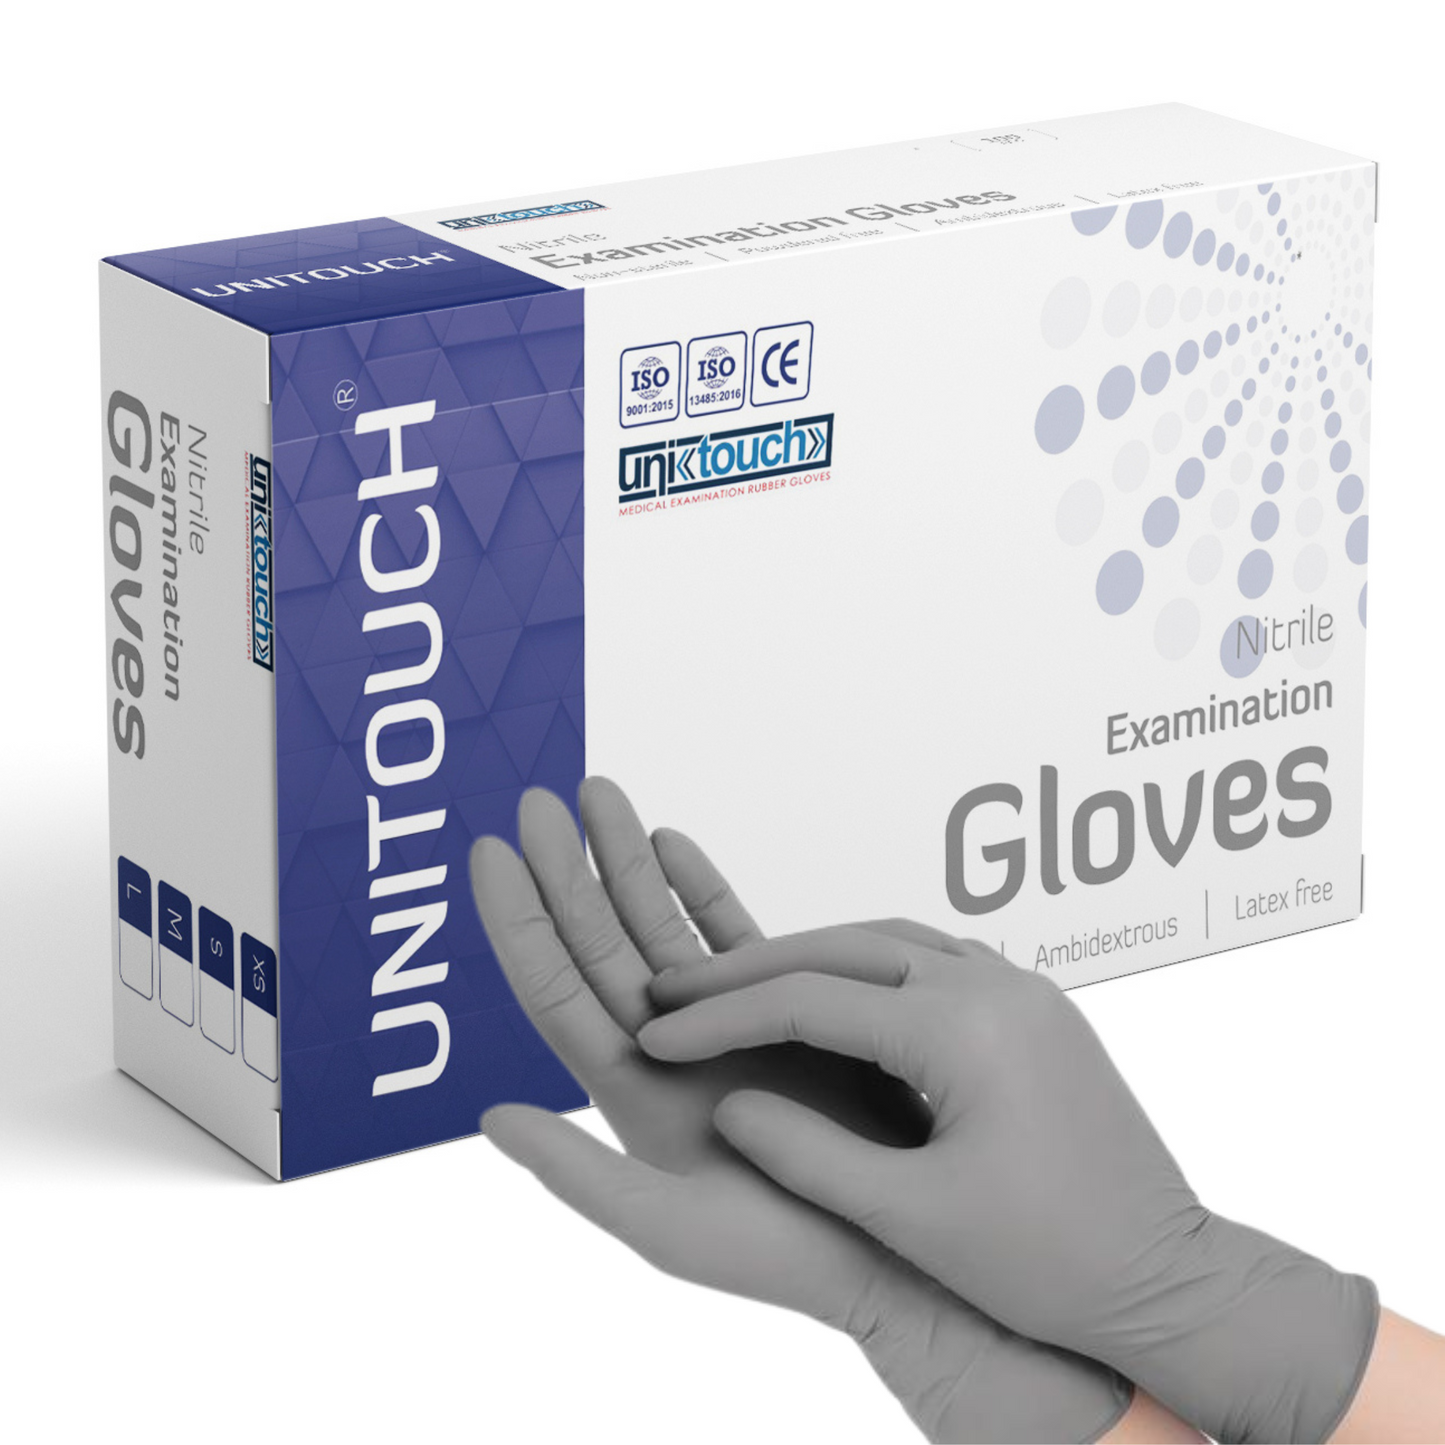 Unitouch Nitrile Powdered Free Examination Gloves (Grey) Pack of 100 Pcs